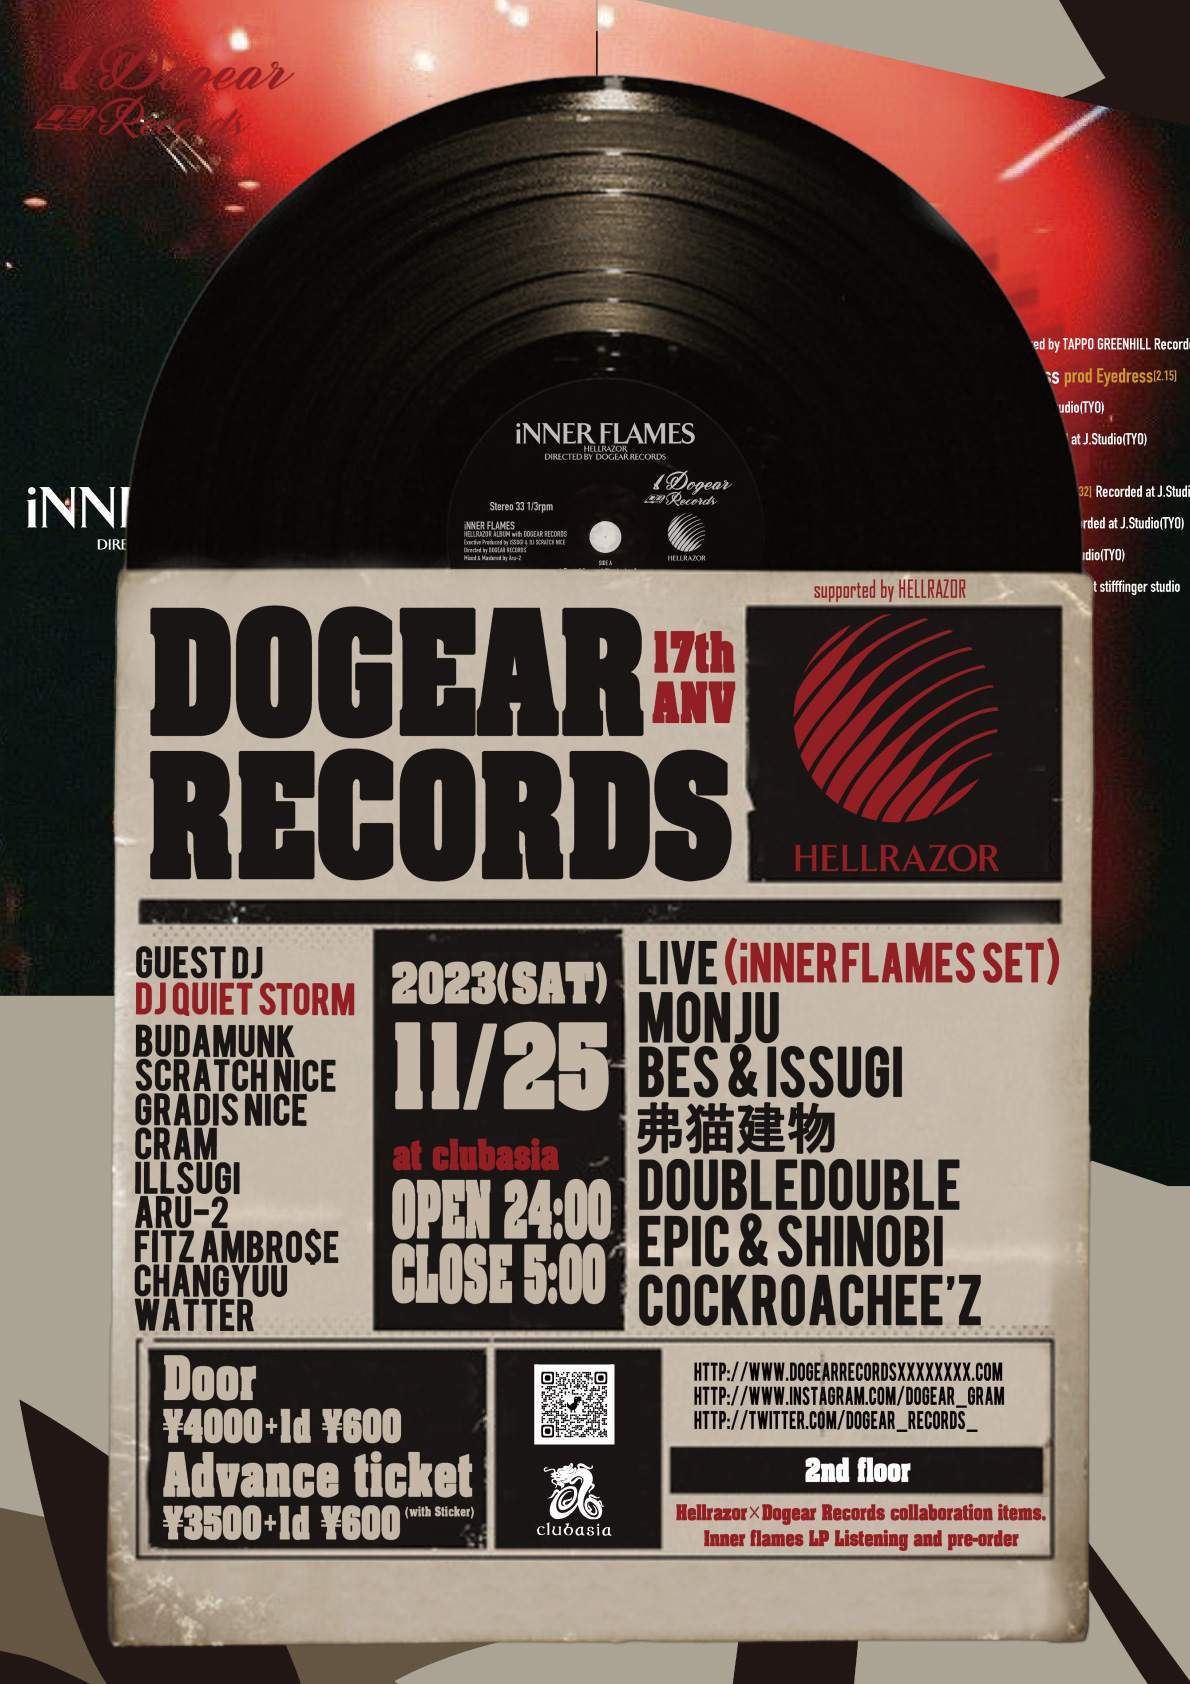 DOGEAR RECORDS 17th Anniversary Party supported by HELLRAZOR - Página frontal